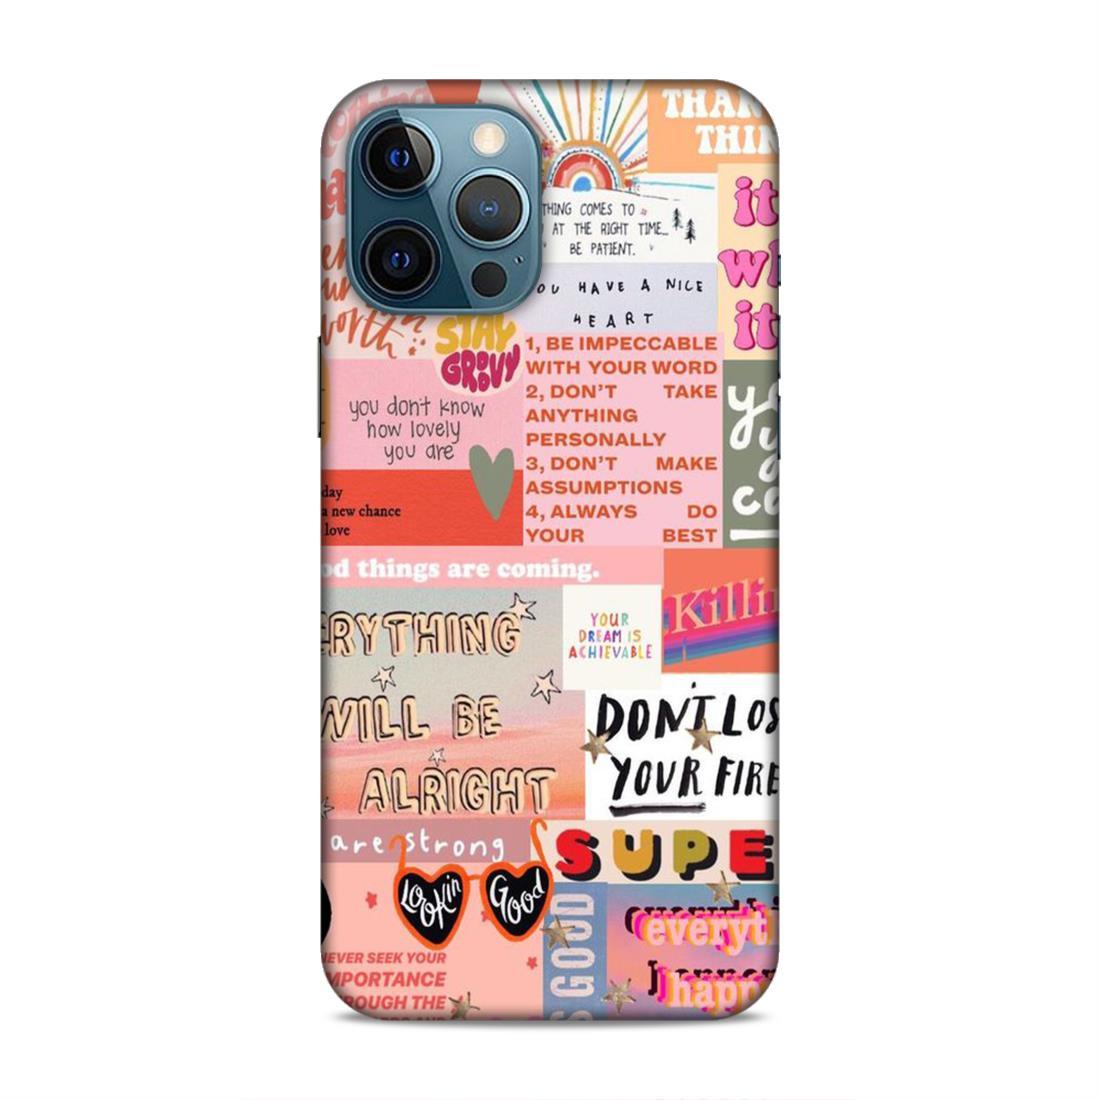 Have A Nice Heart iPhone 12 Pro Max Phone Cover Case